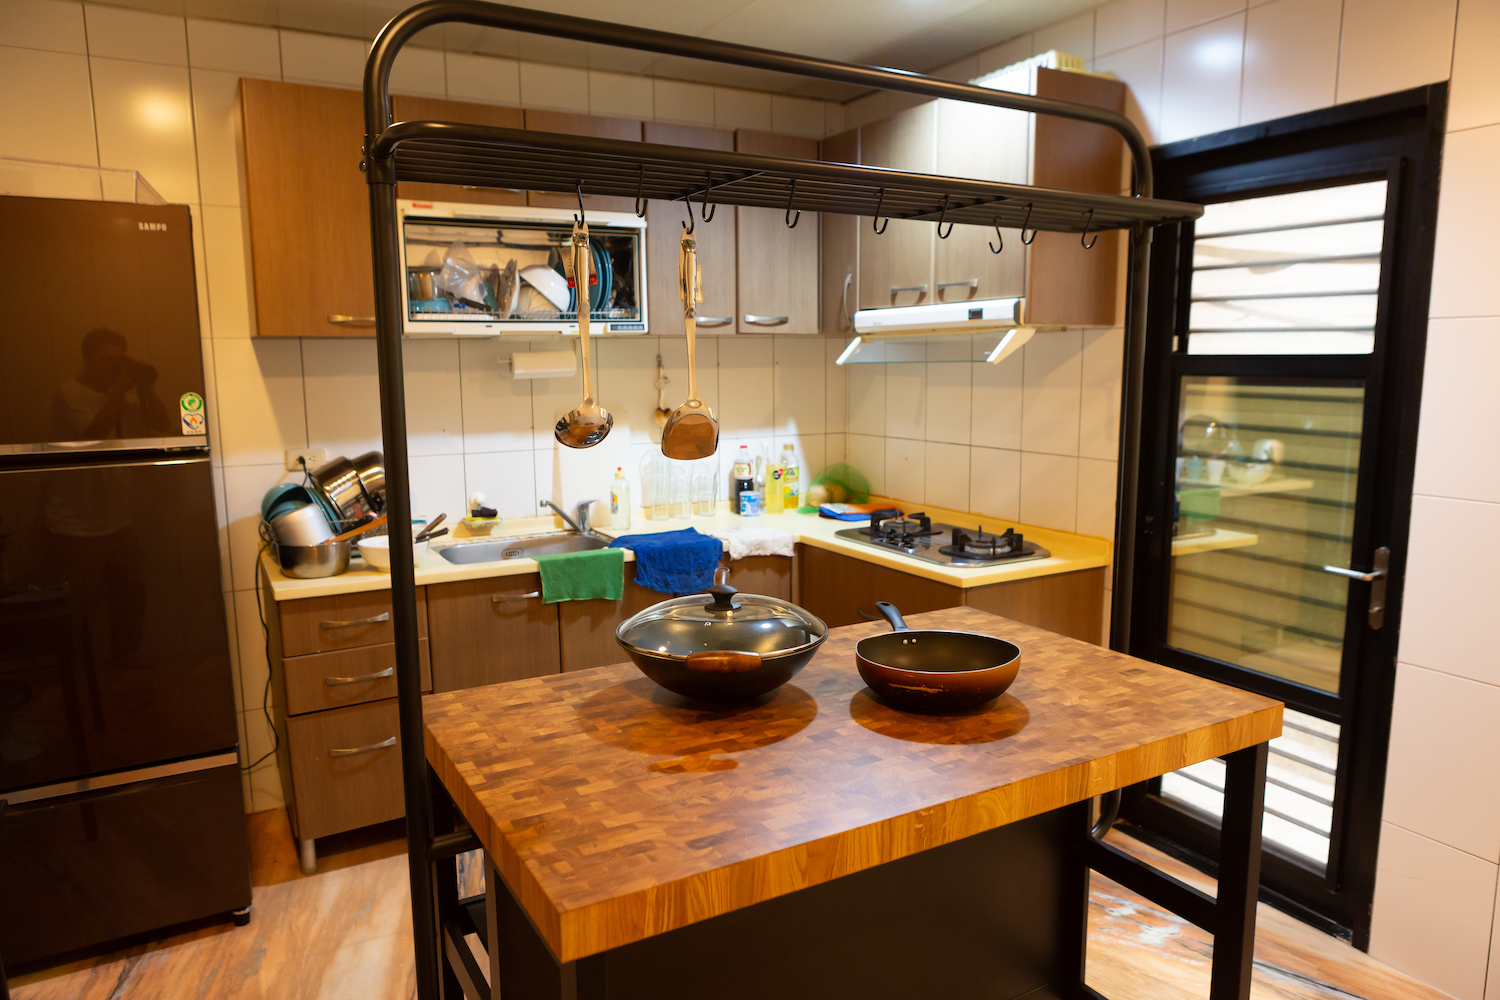 The shared kitchen of Launcher House